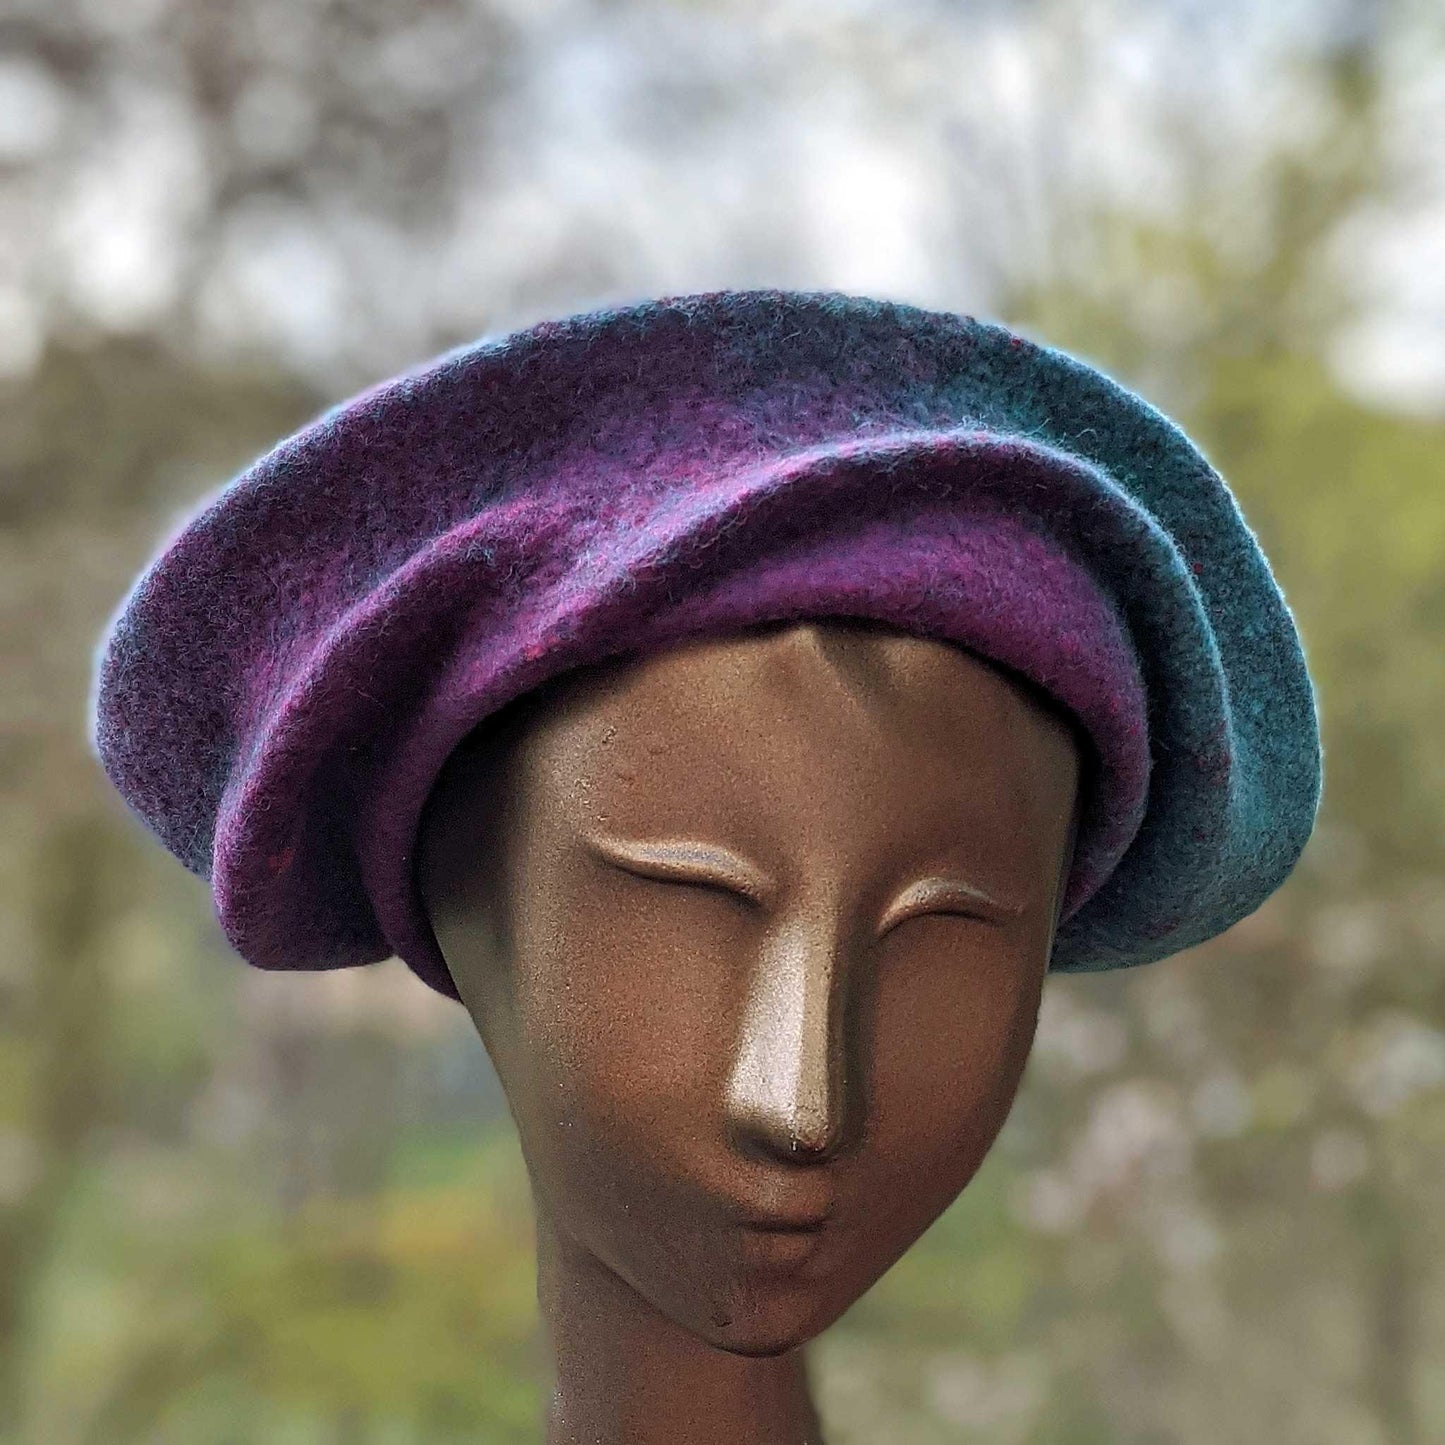 Undulating Spiral Hat in Blue-Green and Raspberry - front view